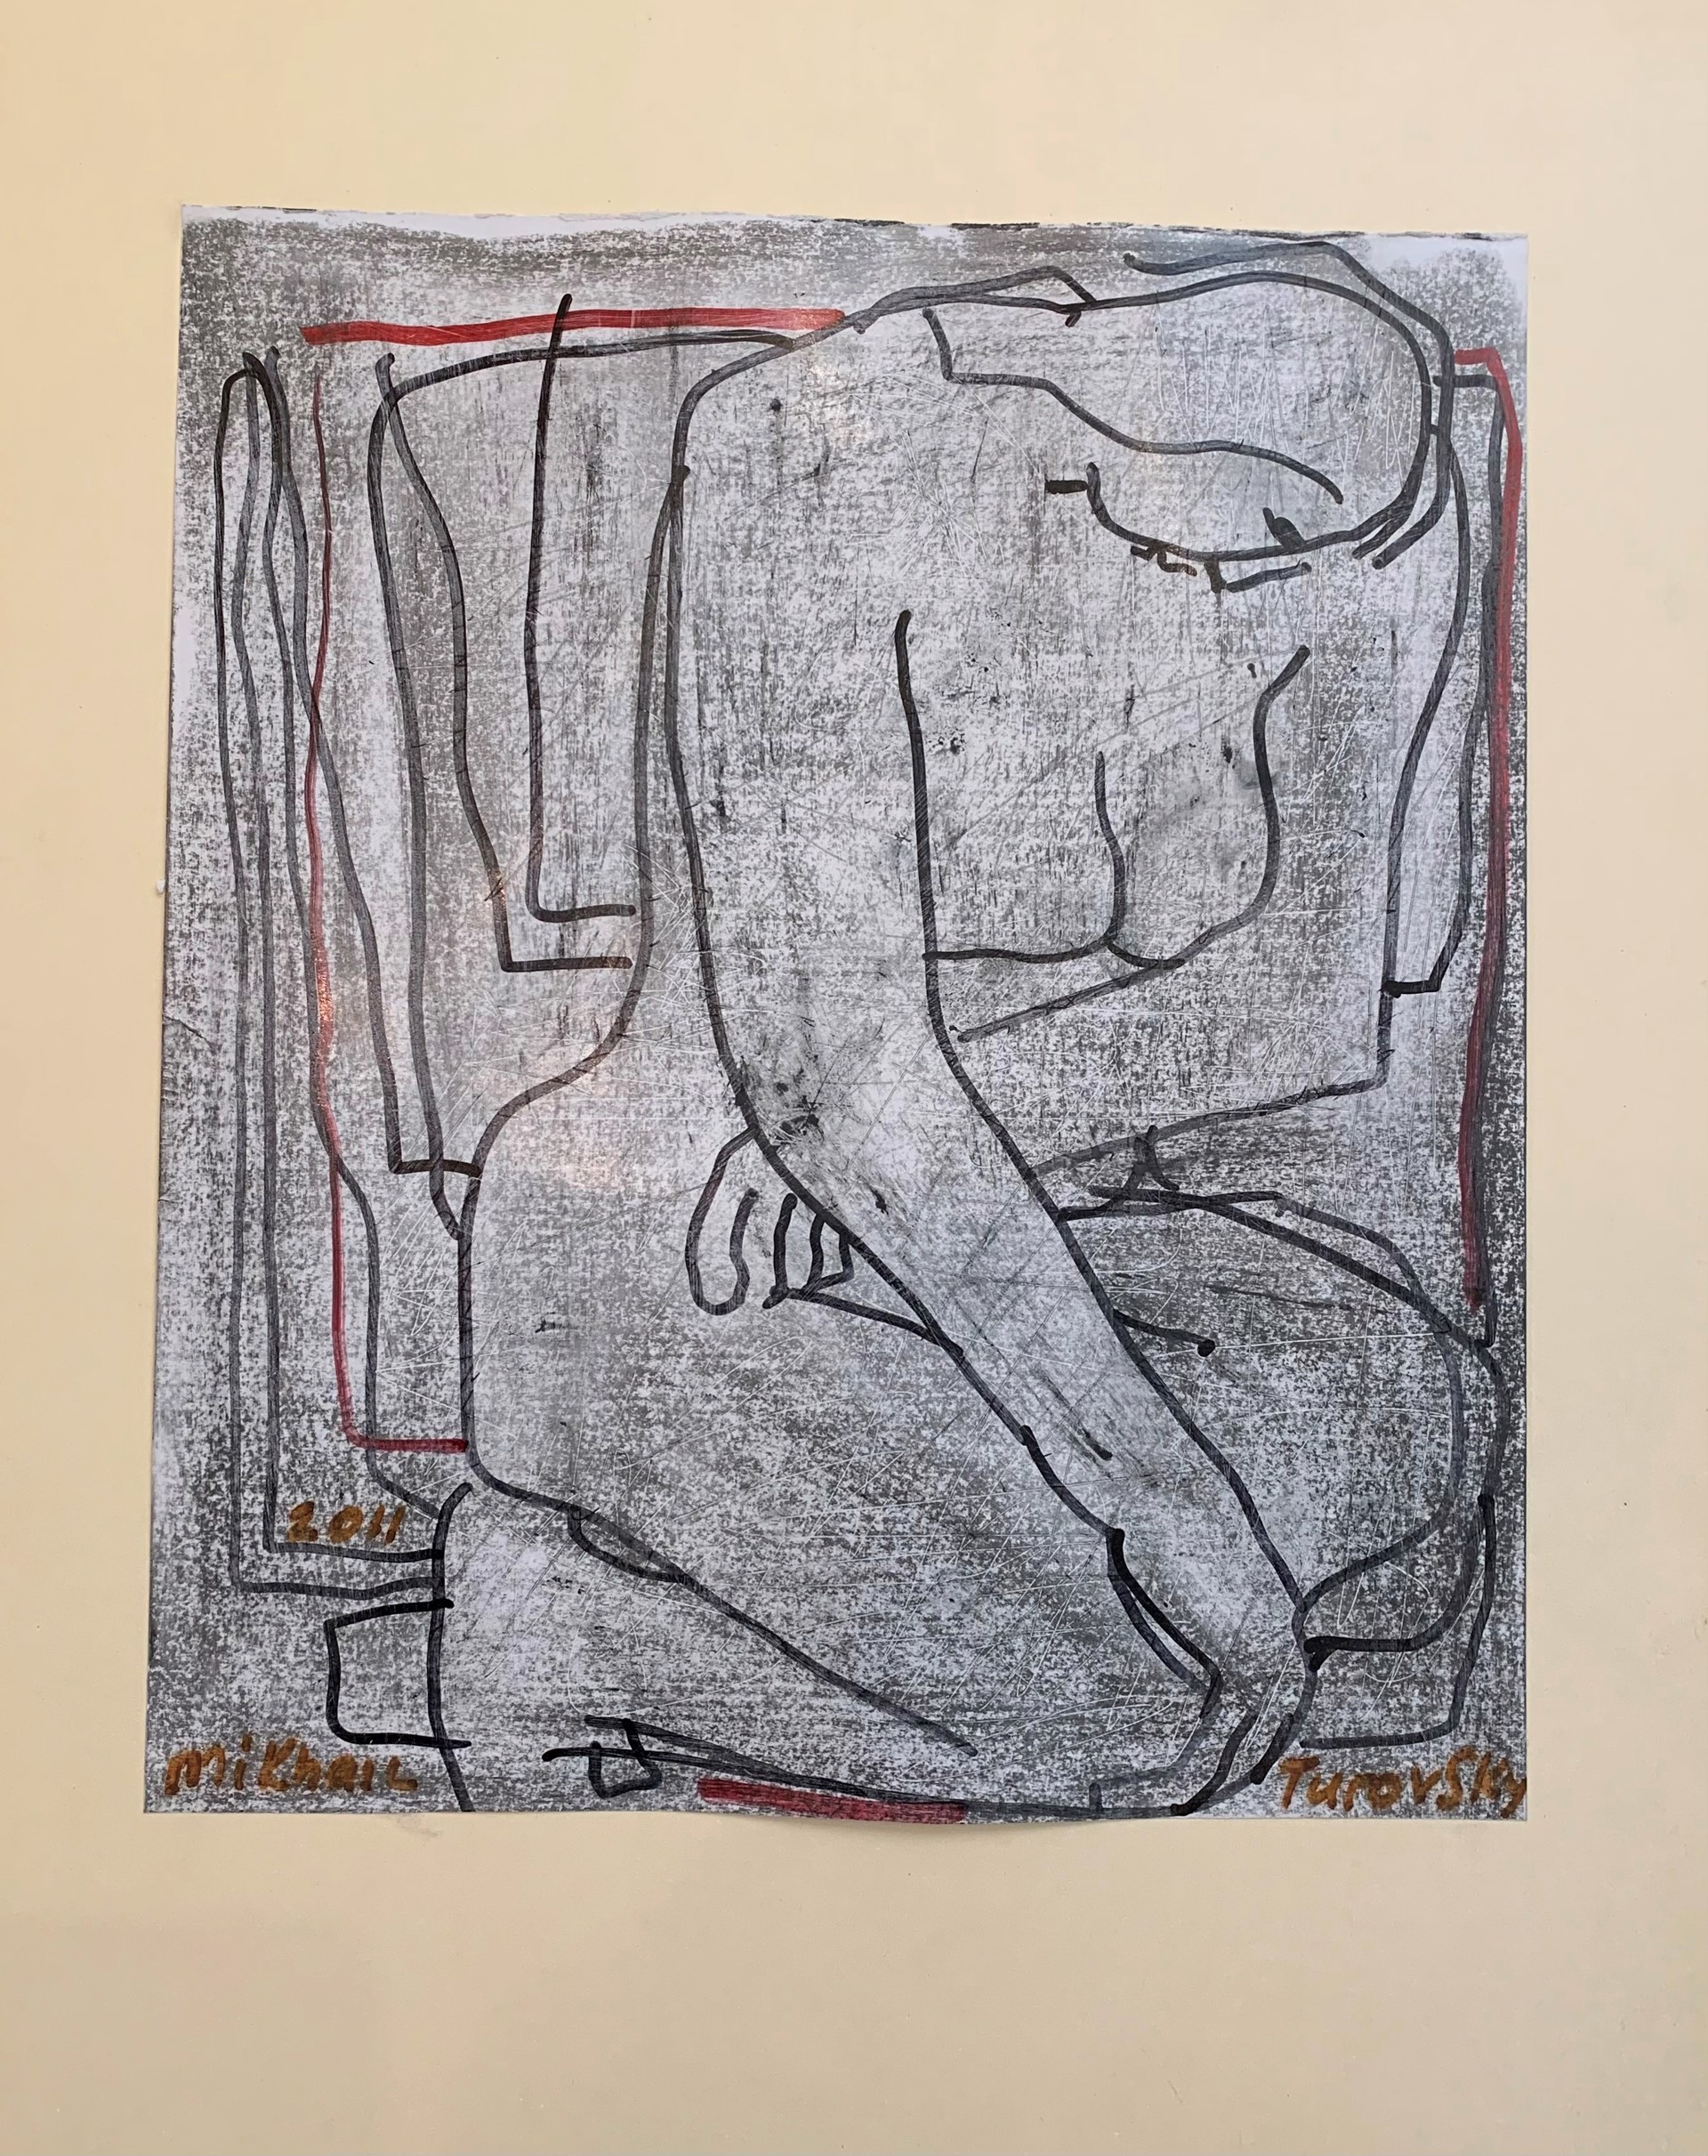 Kneeling Nude SOLD (Benefit for Limbs For Liberty Ukraine) by Mikhail Turovsky